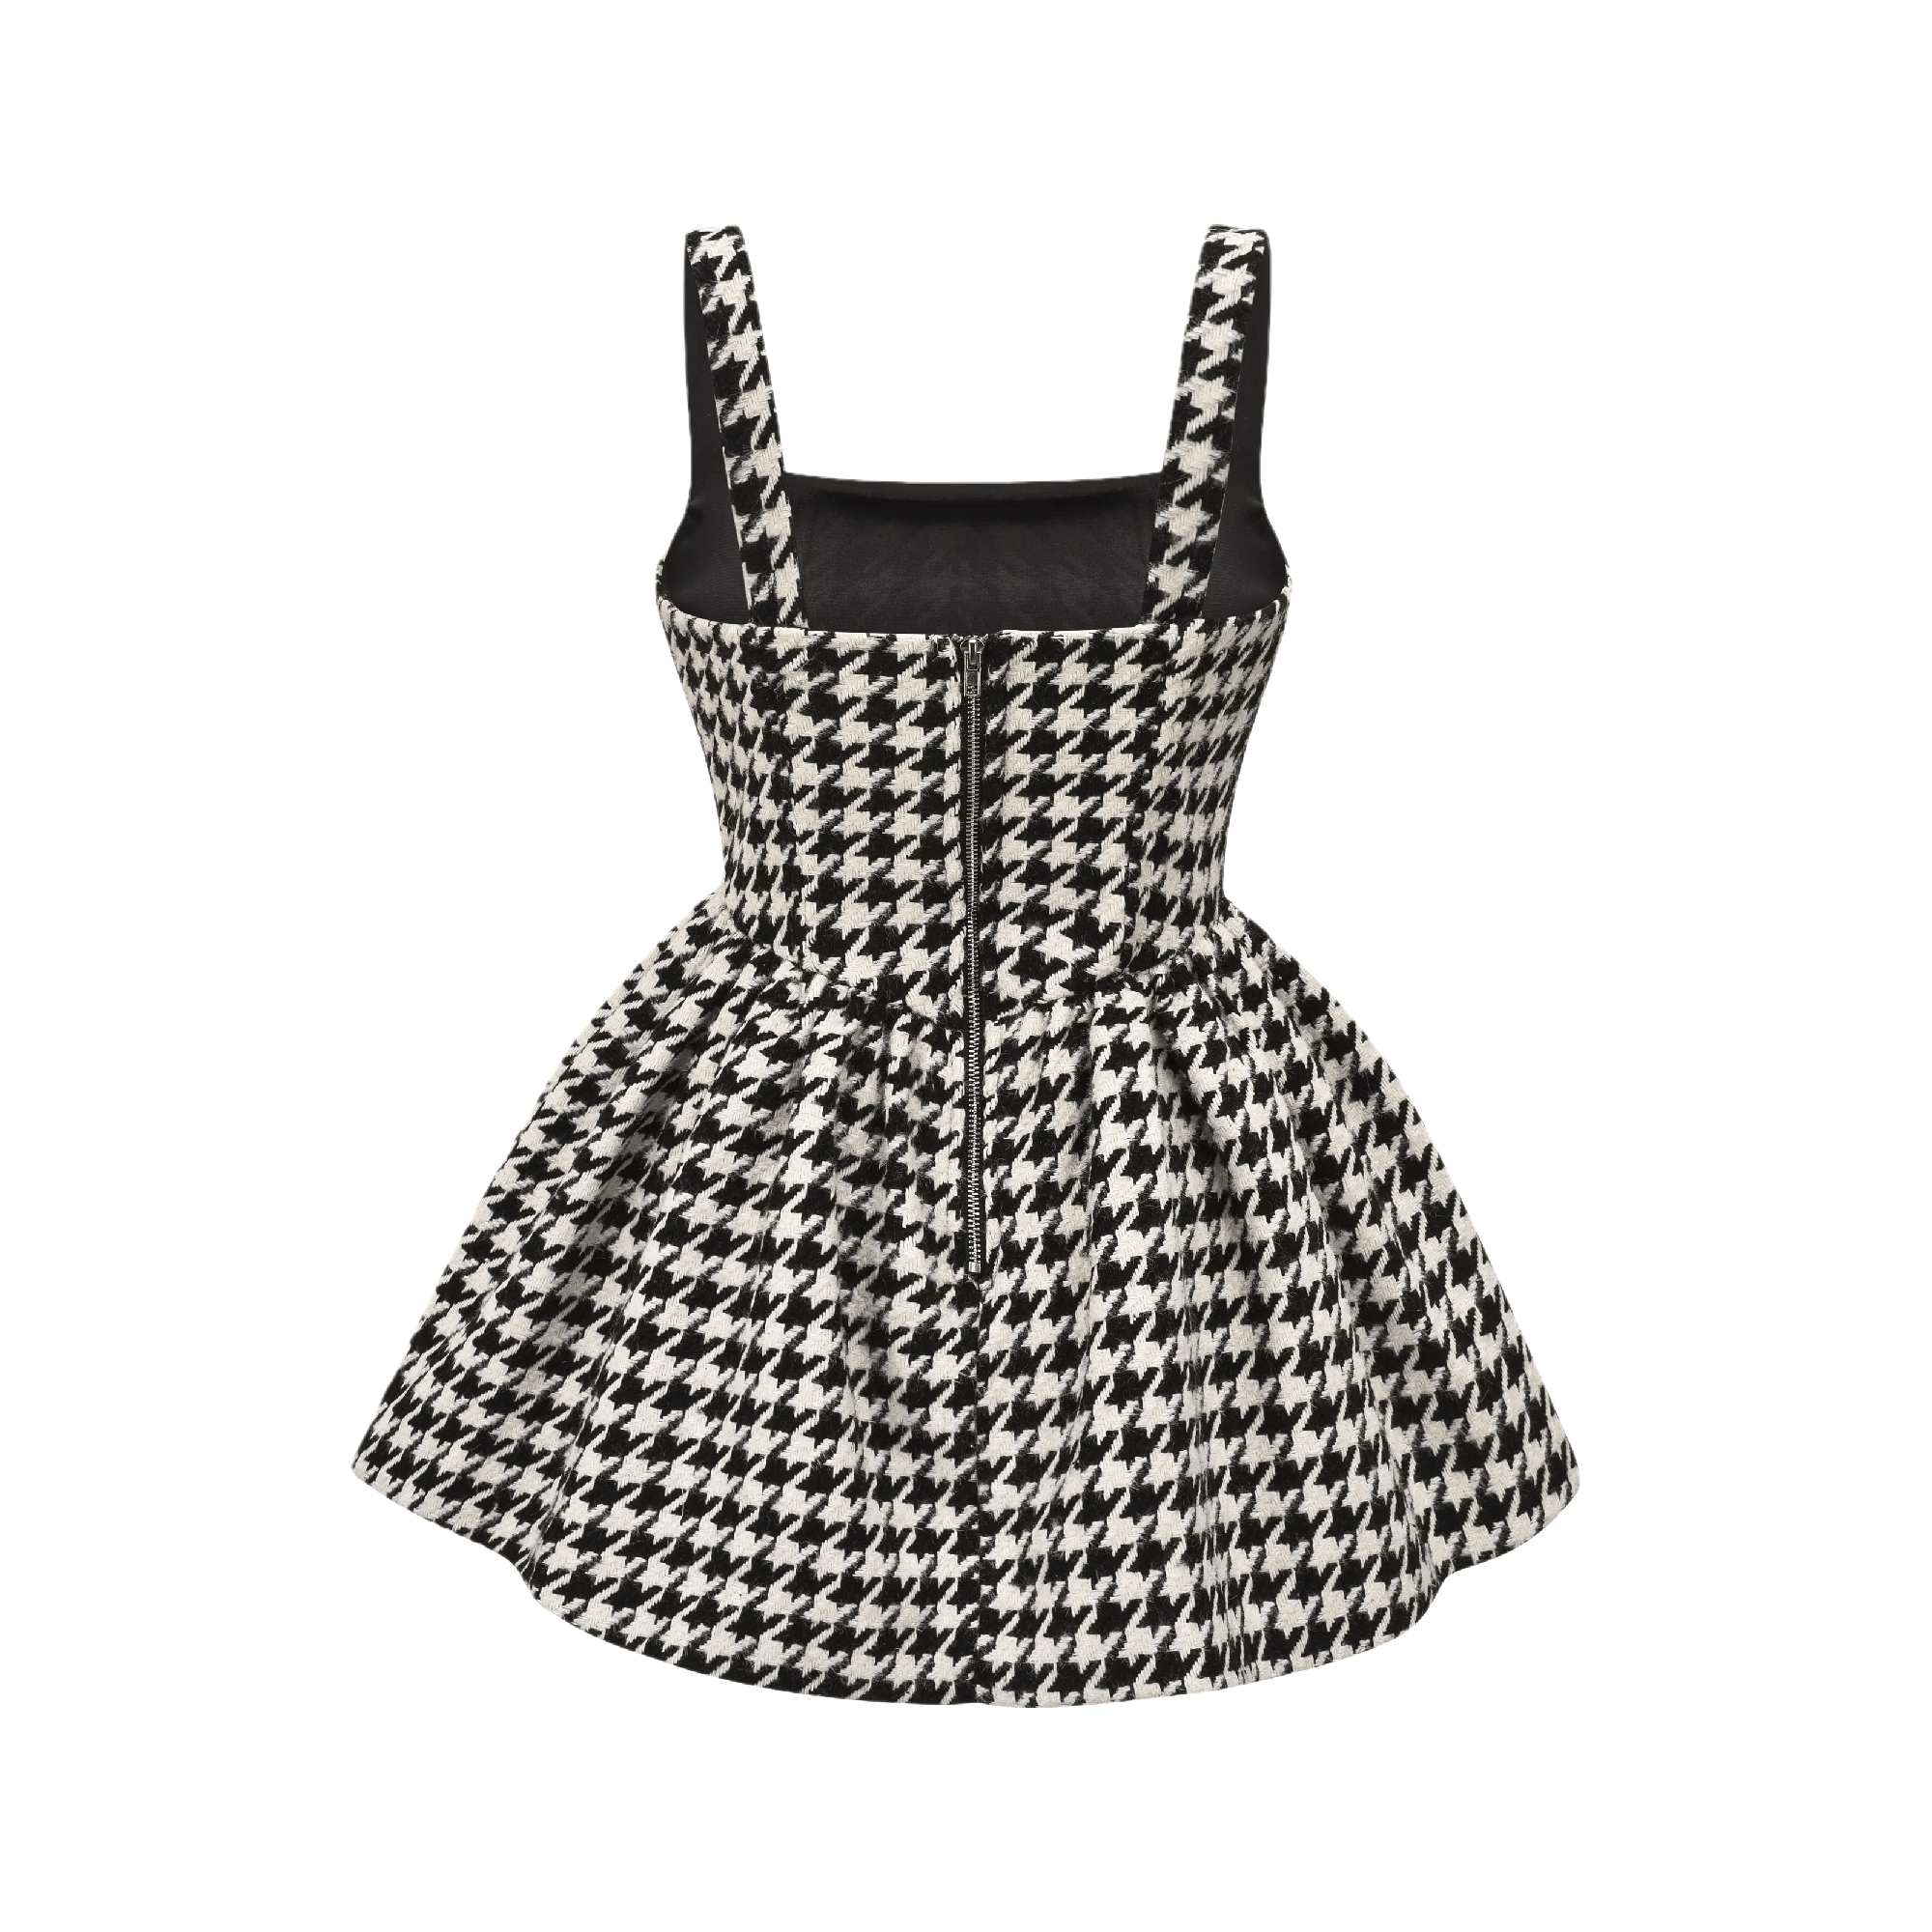 More & More-houndstooth mini dress - itsy, it‘z different